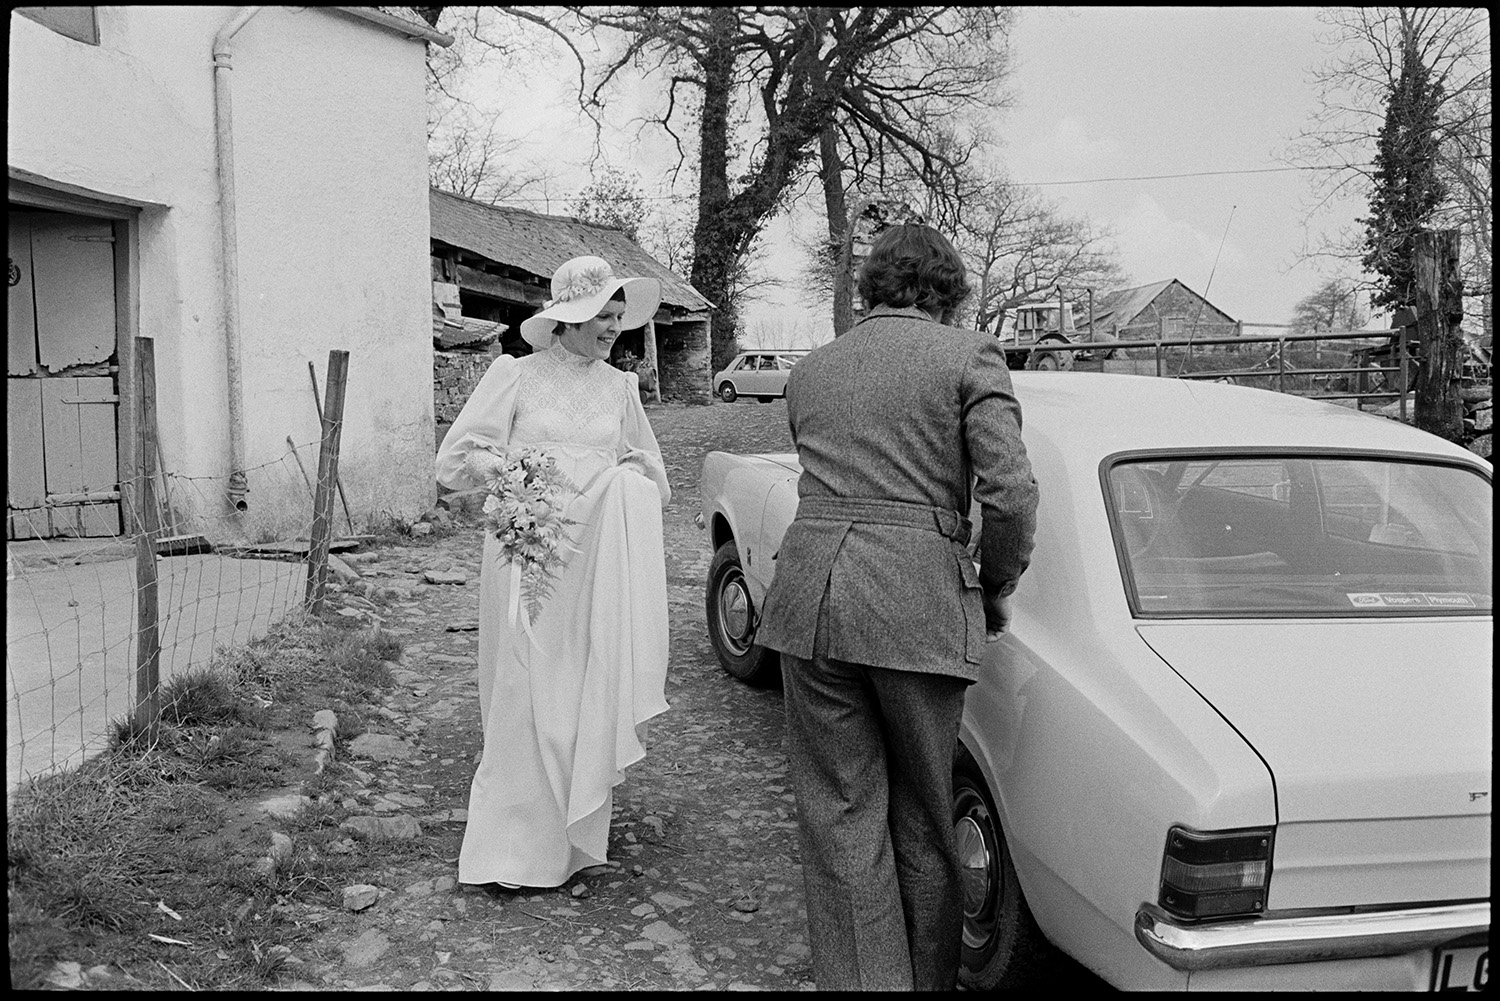 Bride and family at home, setting off for wedding in car with bridesmaid. 
[Mary Pugsley getting into a car in the farmyard at Lower Langham, Dolton, to go to her wedding. She is carrying a bouquet and wearing a hat decorated with flowers. Barns and a tractor can be seen in the background.]